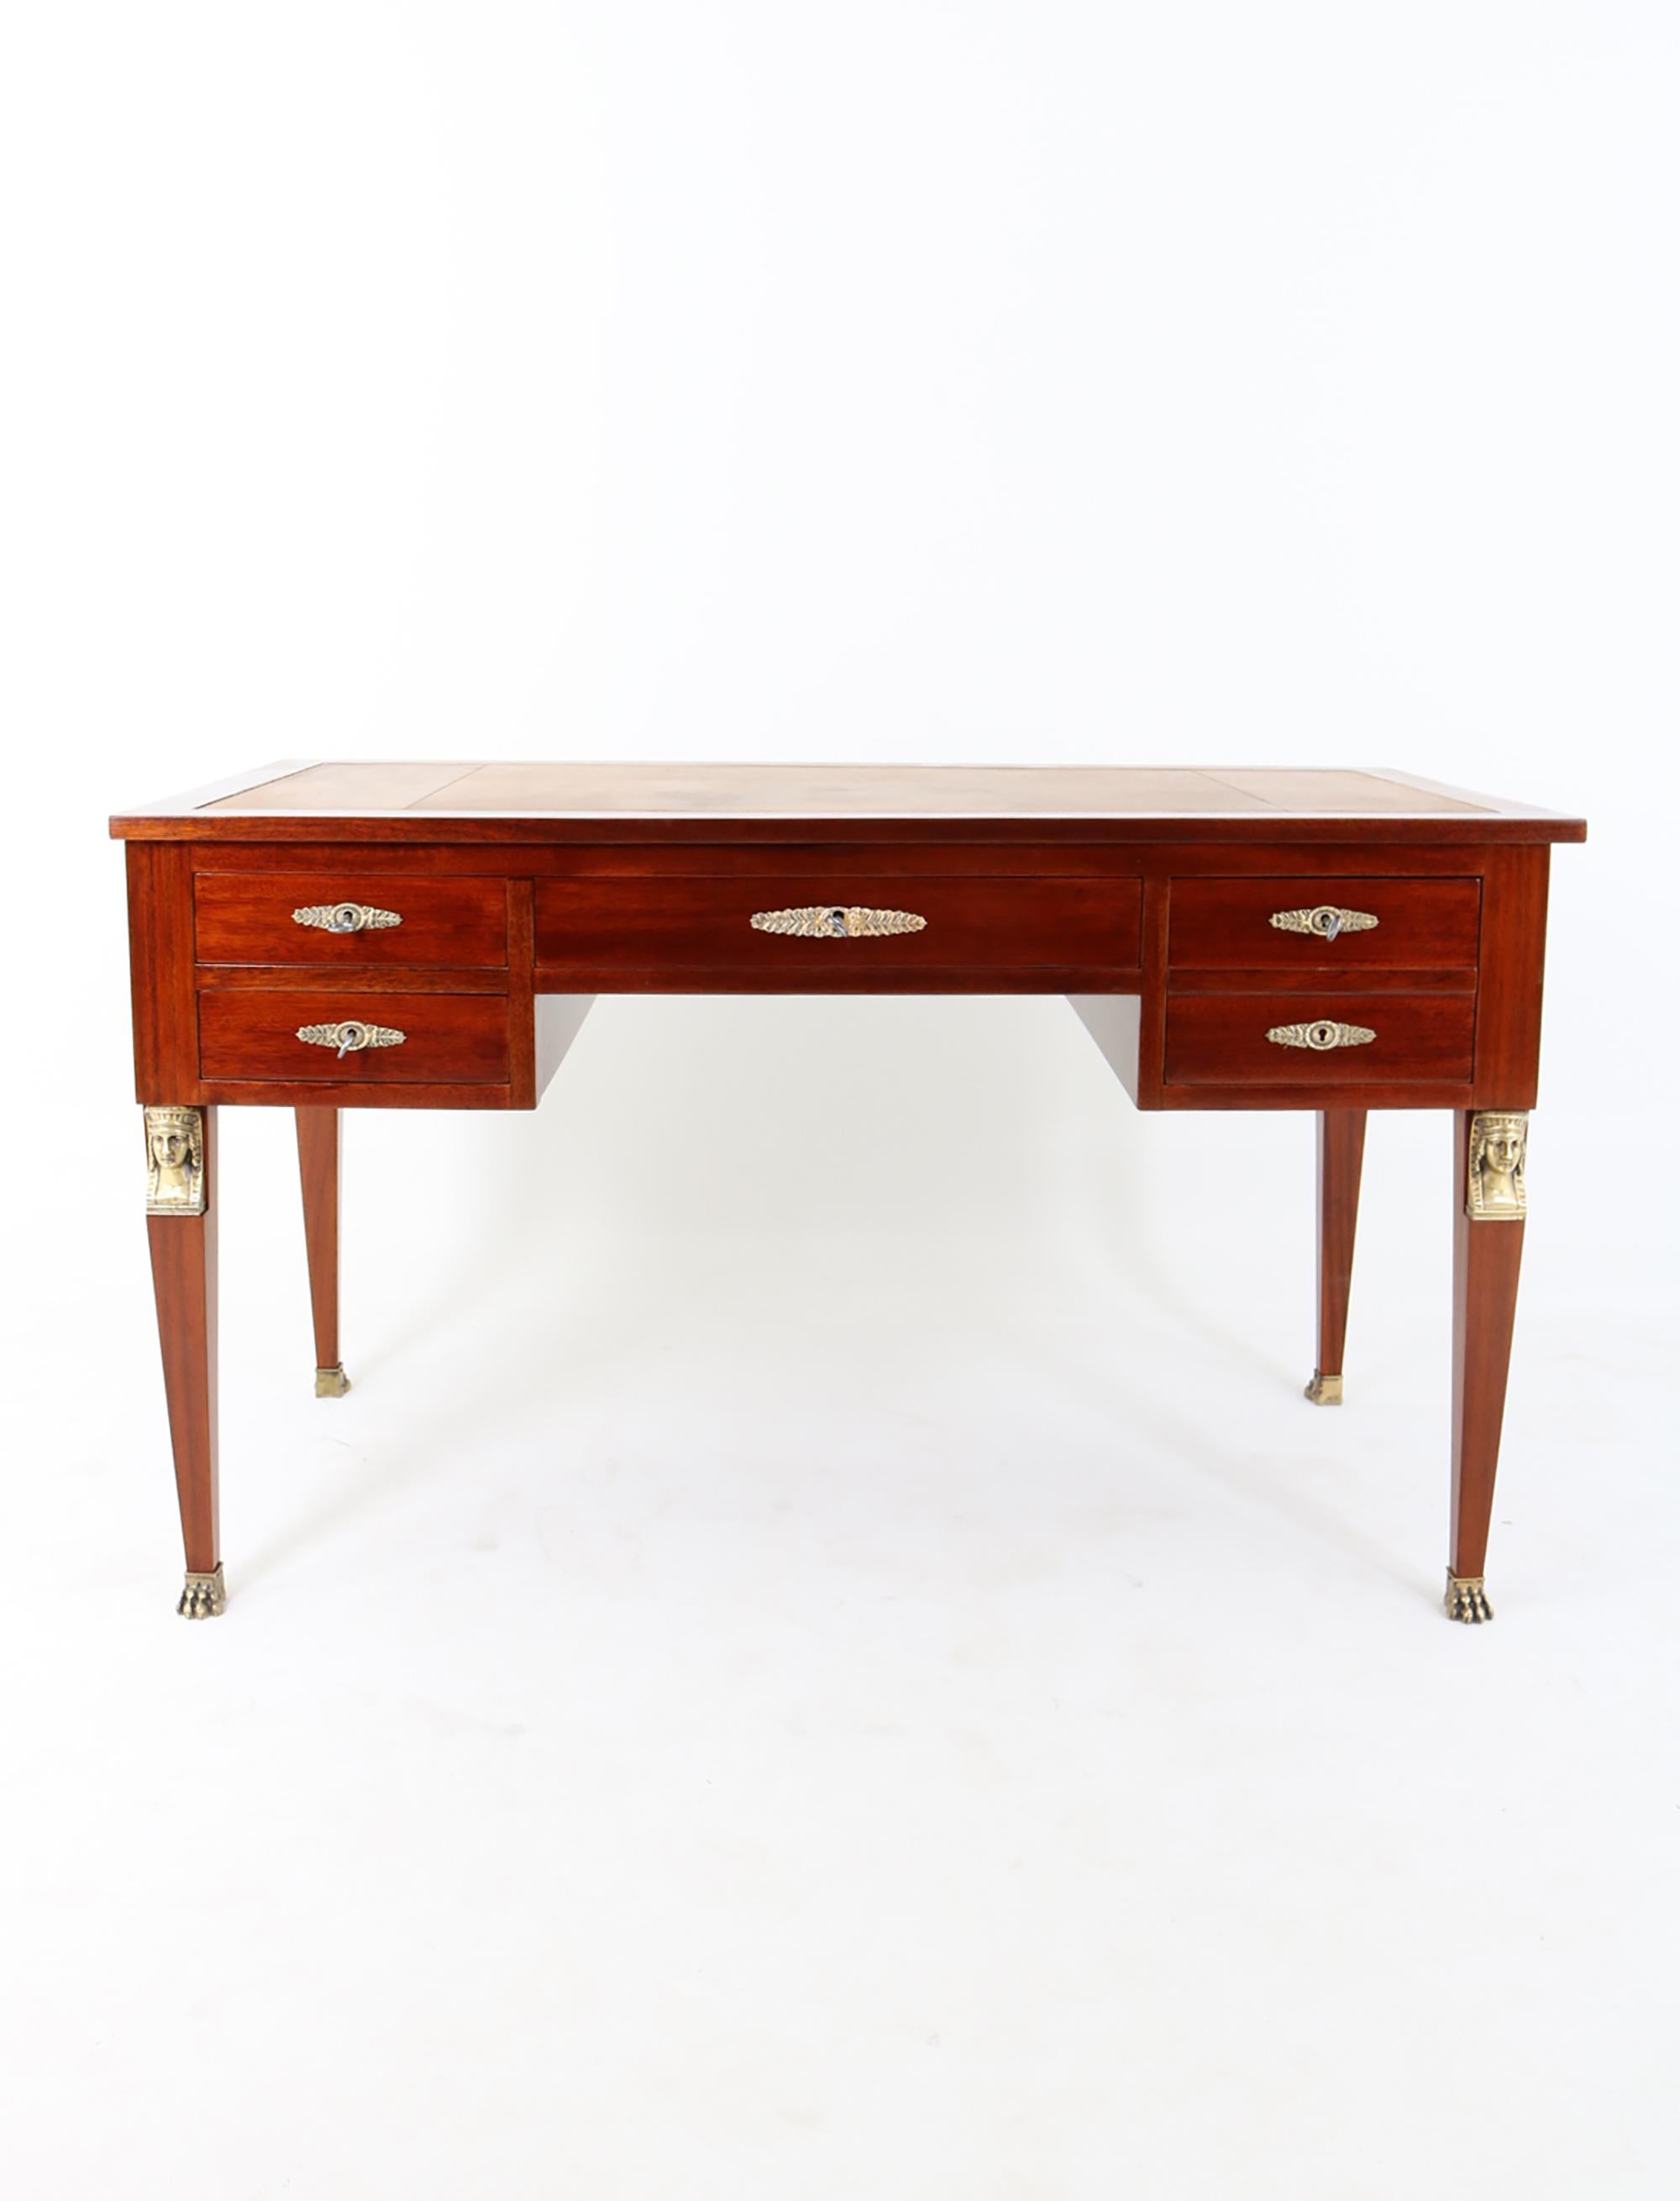 Empire desk with mahogany veneer, decorated on both sides with brass applications in the form of caryatids and floral motifs. The piece of furniture is equipped with functional lifts, which, like the top, are covered with leather and decorated